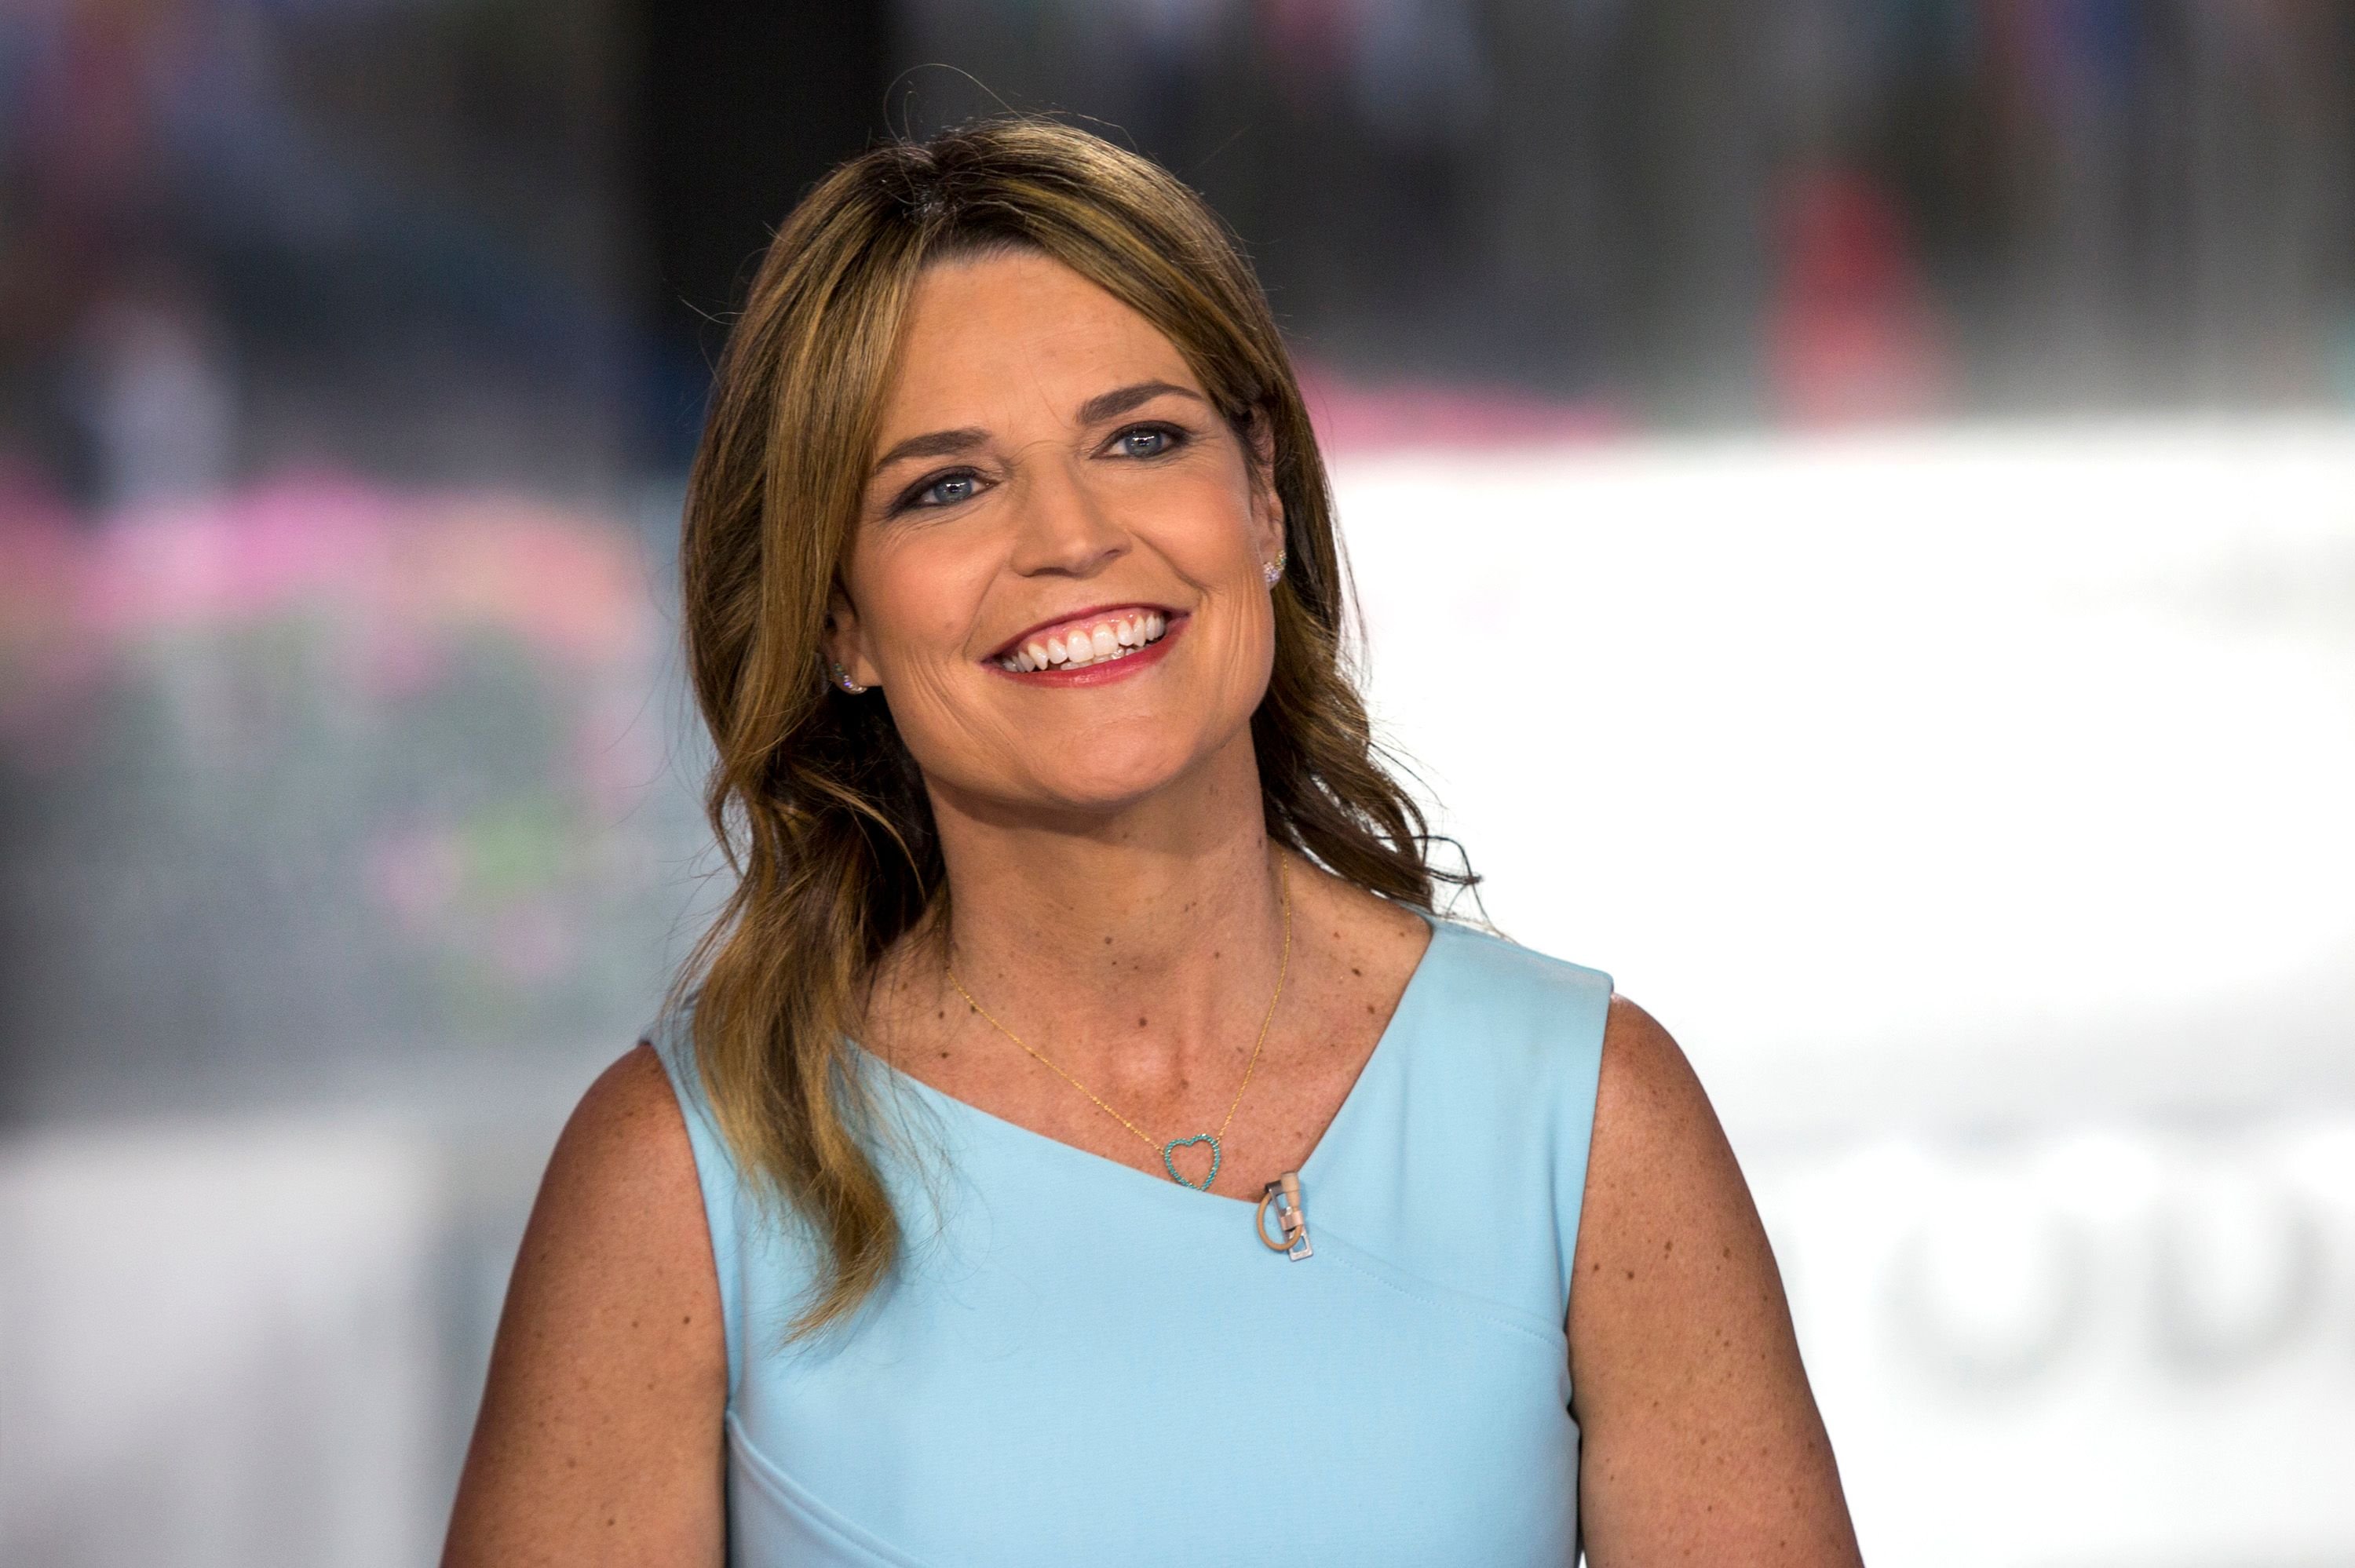 Savannah Guthrie at Today - Season 67 on Wednesday June 13, 2018 | Photo: Photo: Getty Images